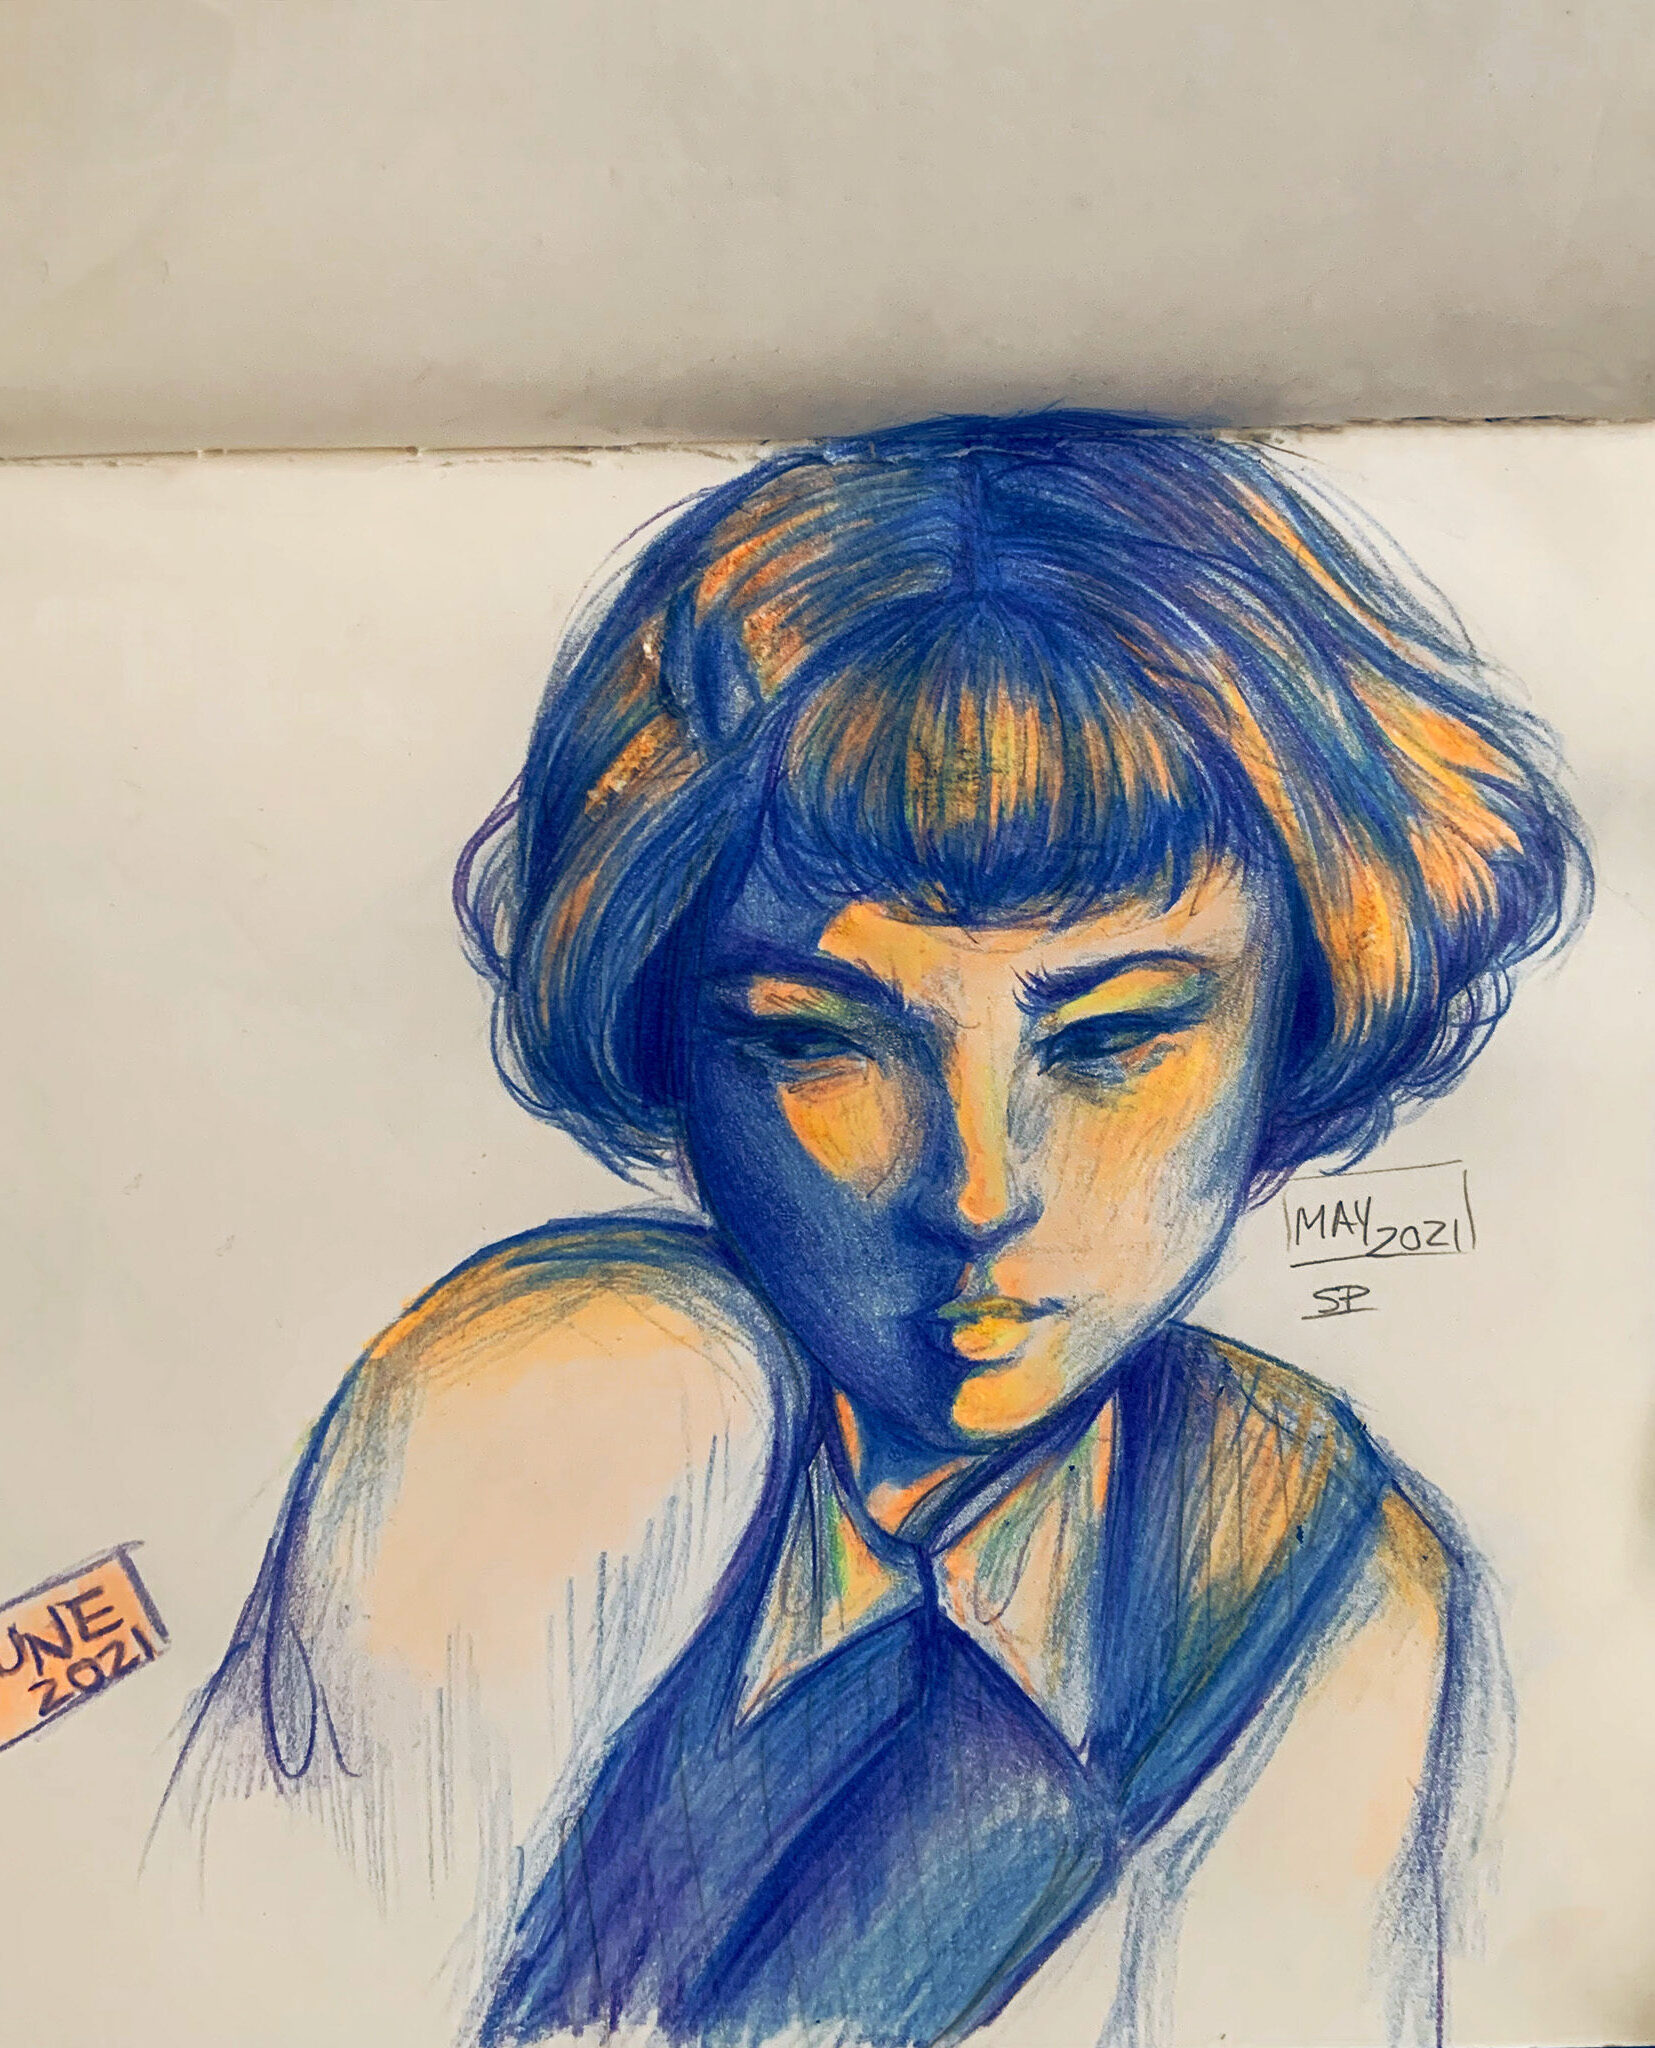 Coloured pencil drawing on a sketchbook. Blue was used for mid tones and shadows where as a complimentary orange colour was used for the highlights.